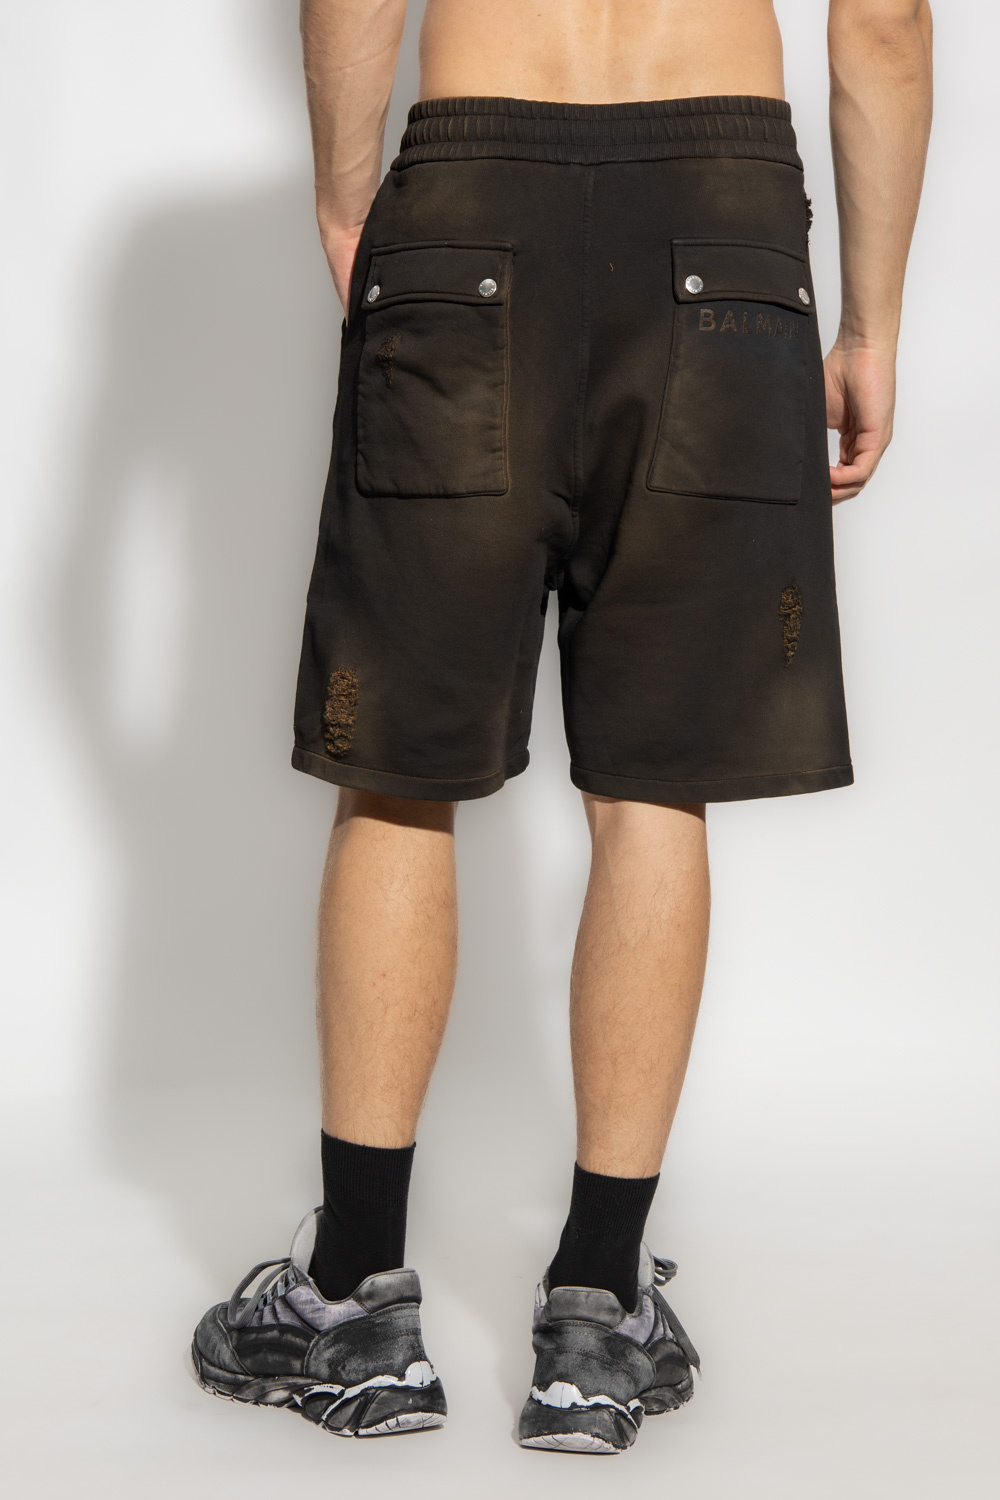 balmain MONOGRAMMED Shorts with vintage effect